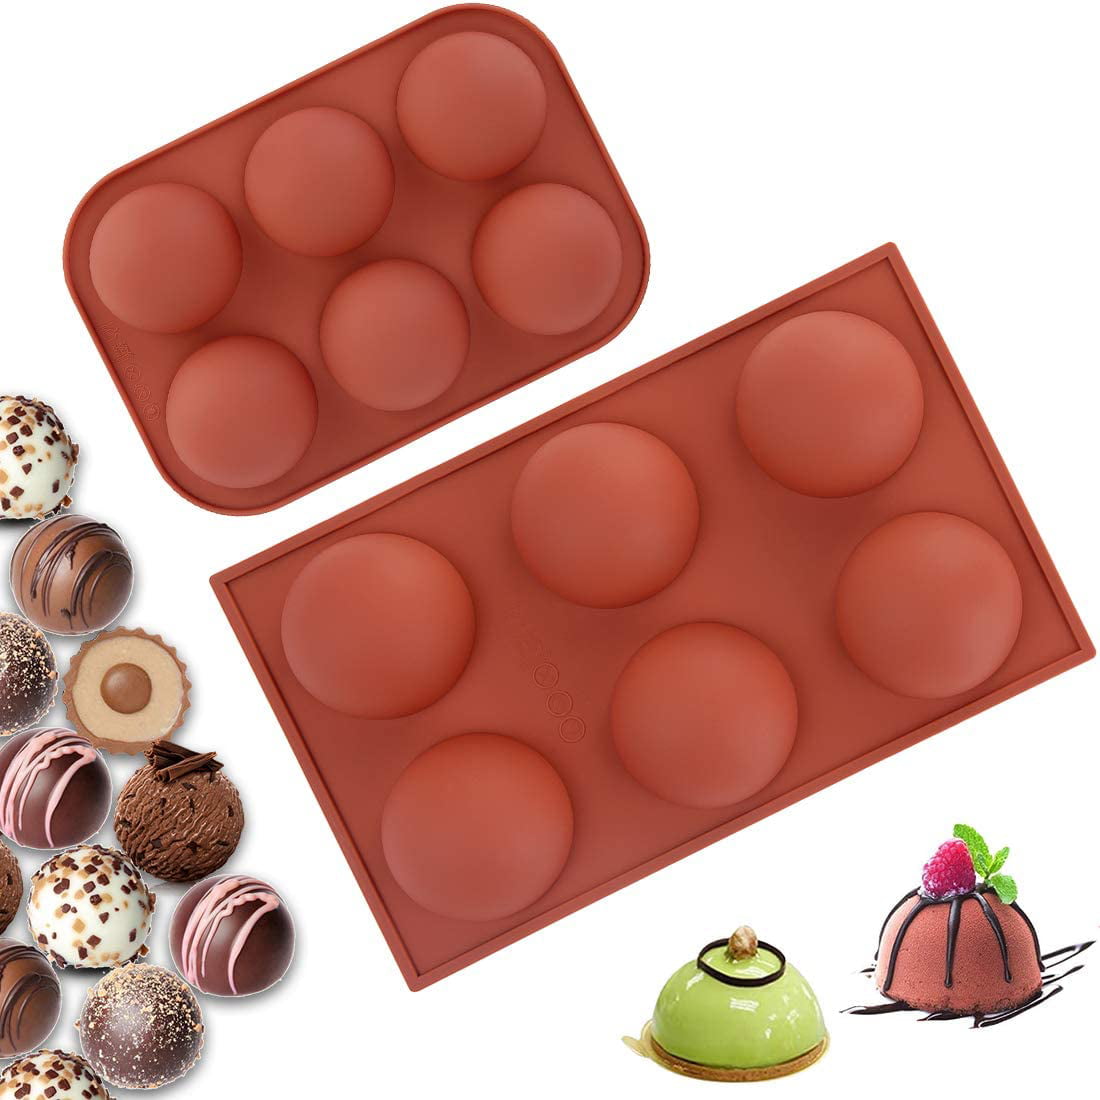 45 Design Silicone Cake Decorating Mould Candy Cookies Chocolate Baking Mold 